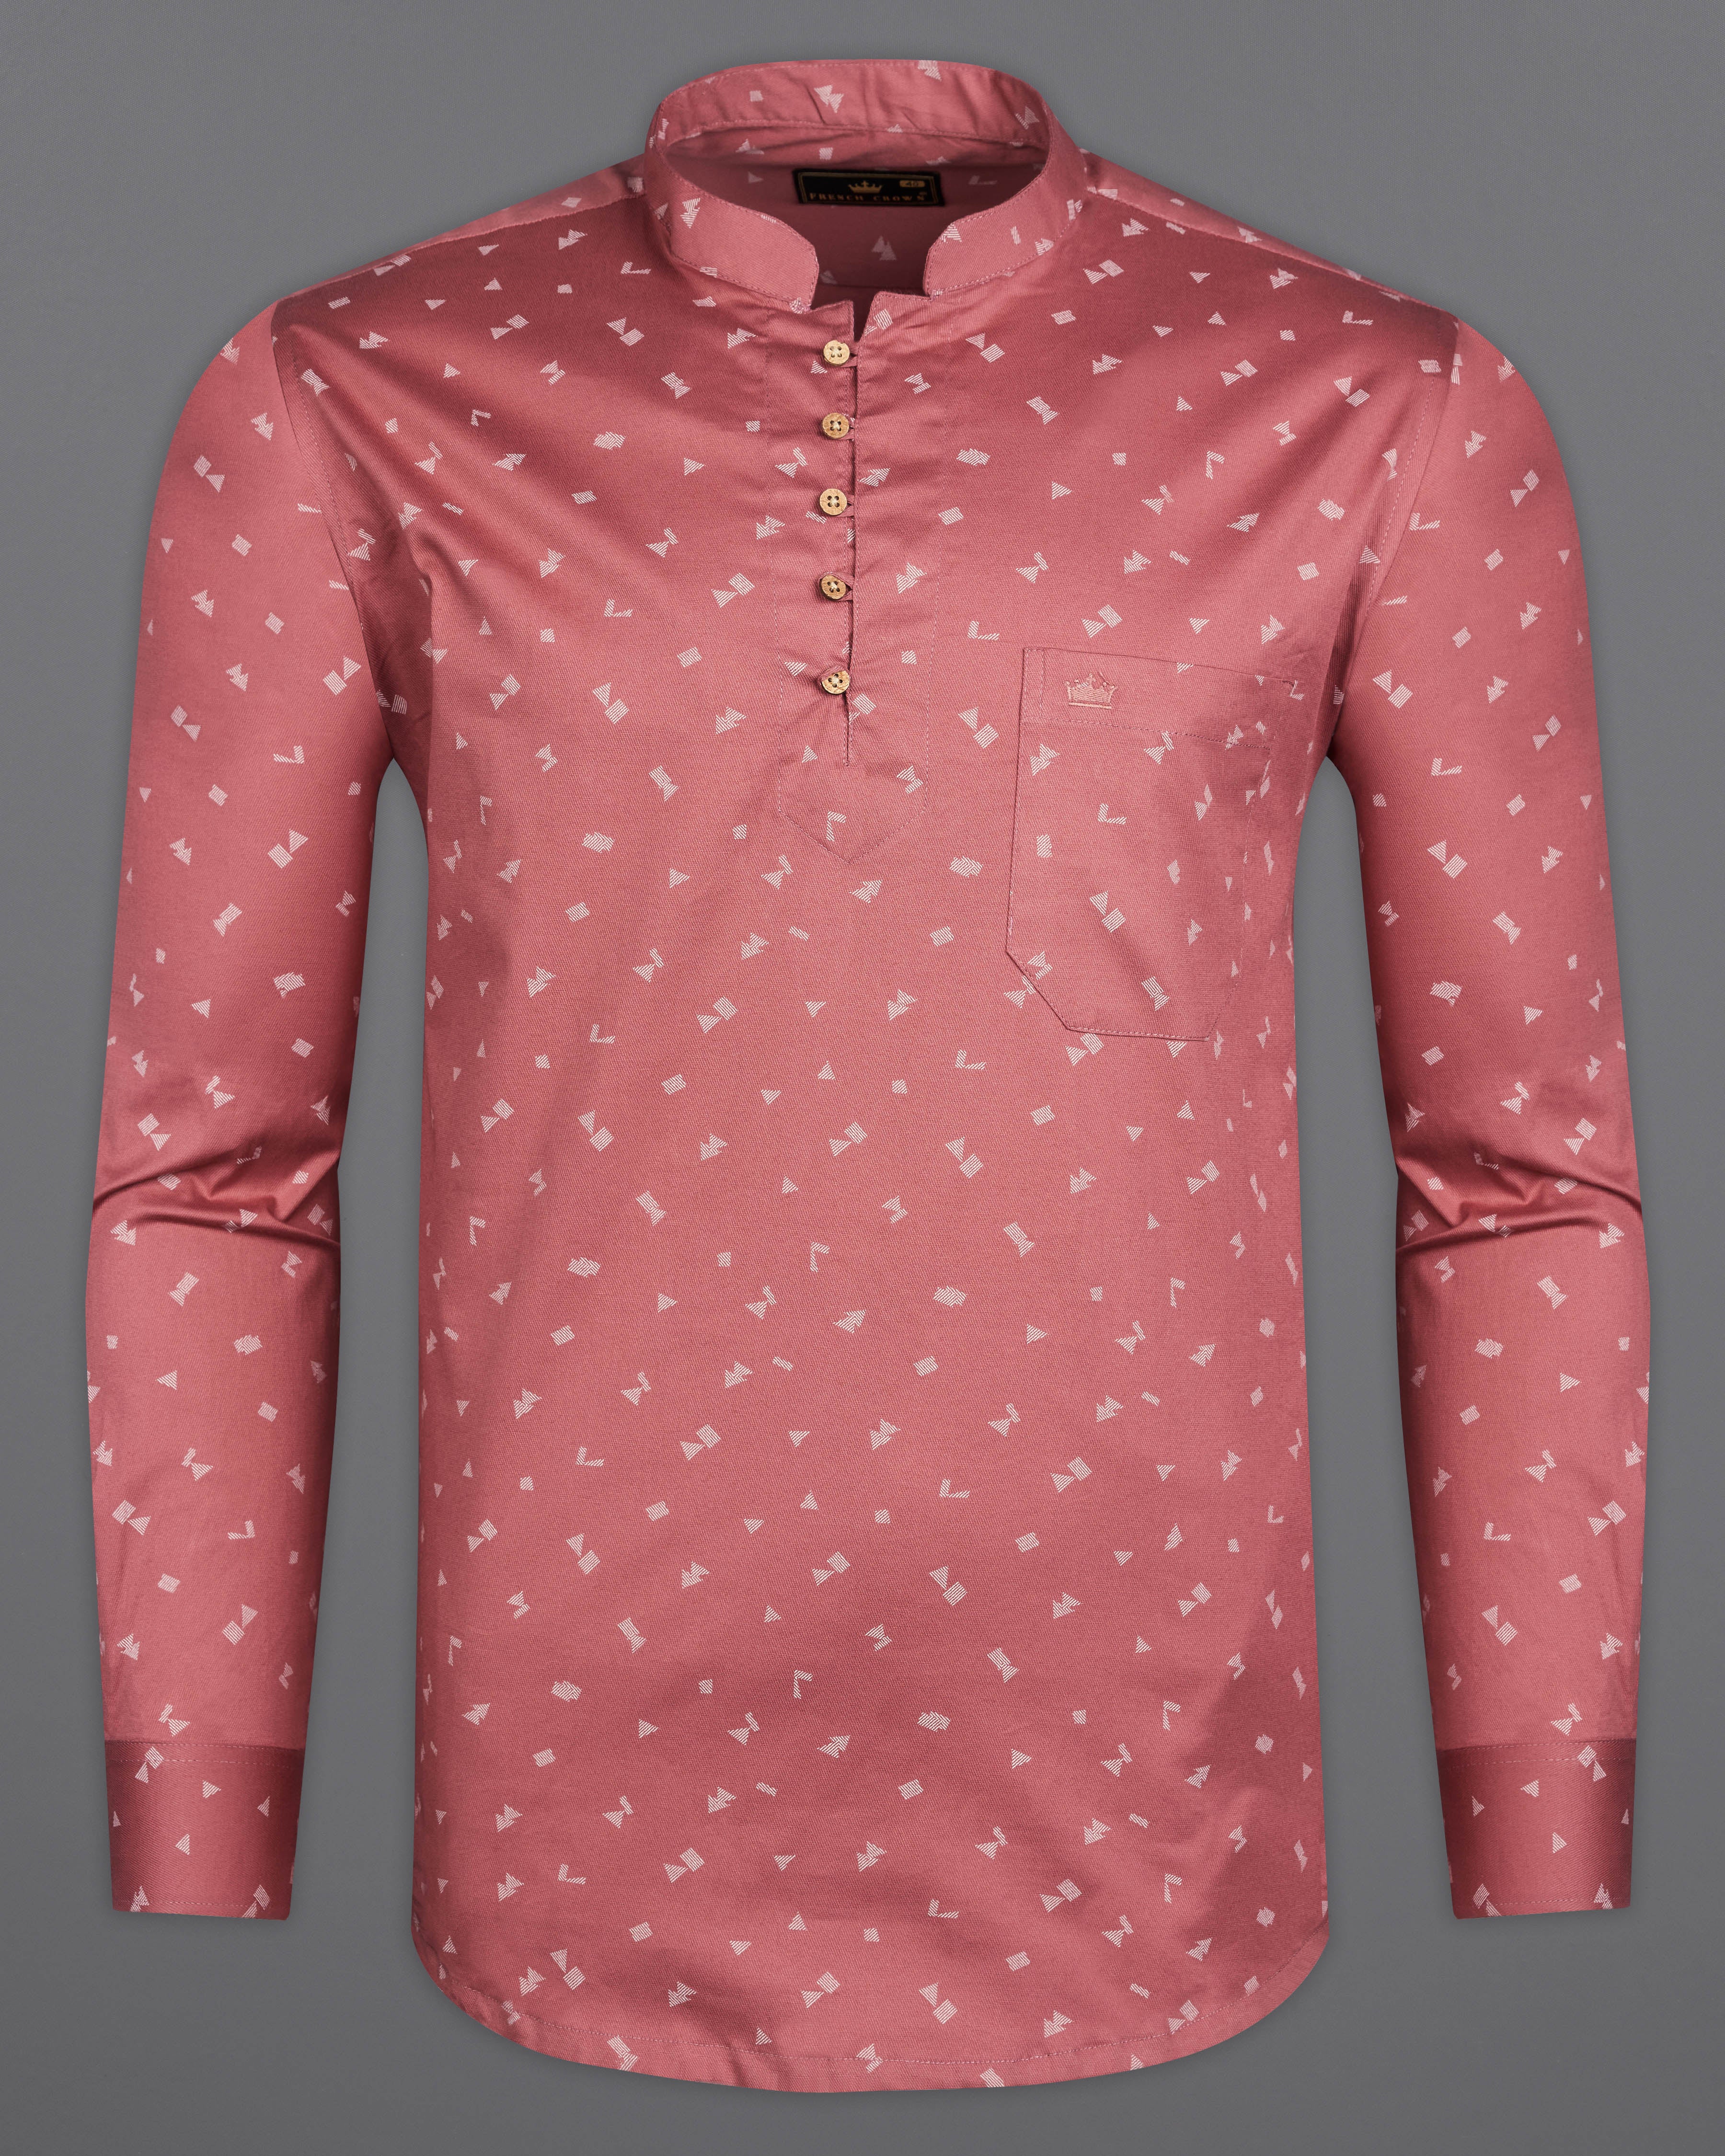 Clay Pink with White Textured Twill Premium Cotton Kurta Shirt 9874-KS-38, 9874-KS-H-38, 9874-KS-39, 9874-KS-H-39, 9874-KS-40, 9874-KS-H-40, 9874-KS-42, 9874-KS-H-42, 9874-KS-44, 9874-KS-H-44, 9874-KS-46, 9874-KS-H-46, 9874-KS-48, 9874-KS-H-48, 9874-KS-50, 9874-KS-H-50, 9874-KS-52, 9874-KS-H-52